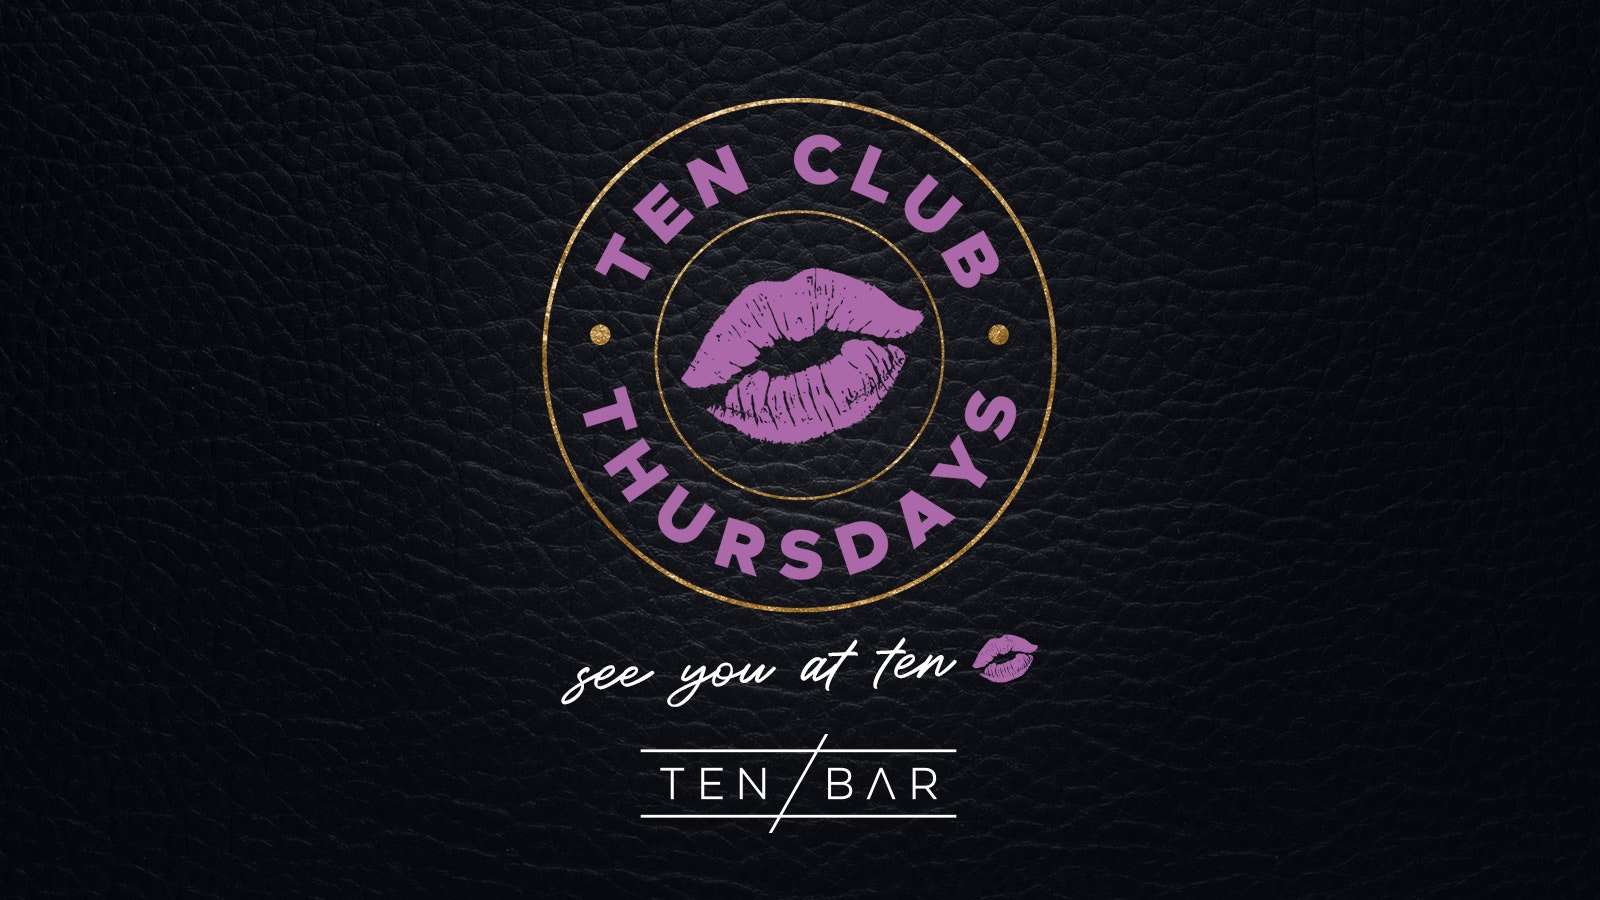 Ten Club Thursdays (Members Exclusive Drinks Deals Wristband) Free Entry all night long, Open from 9pm – 26th October